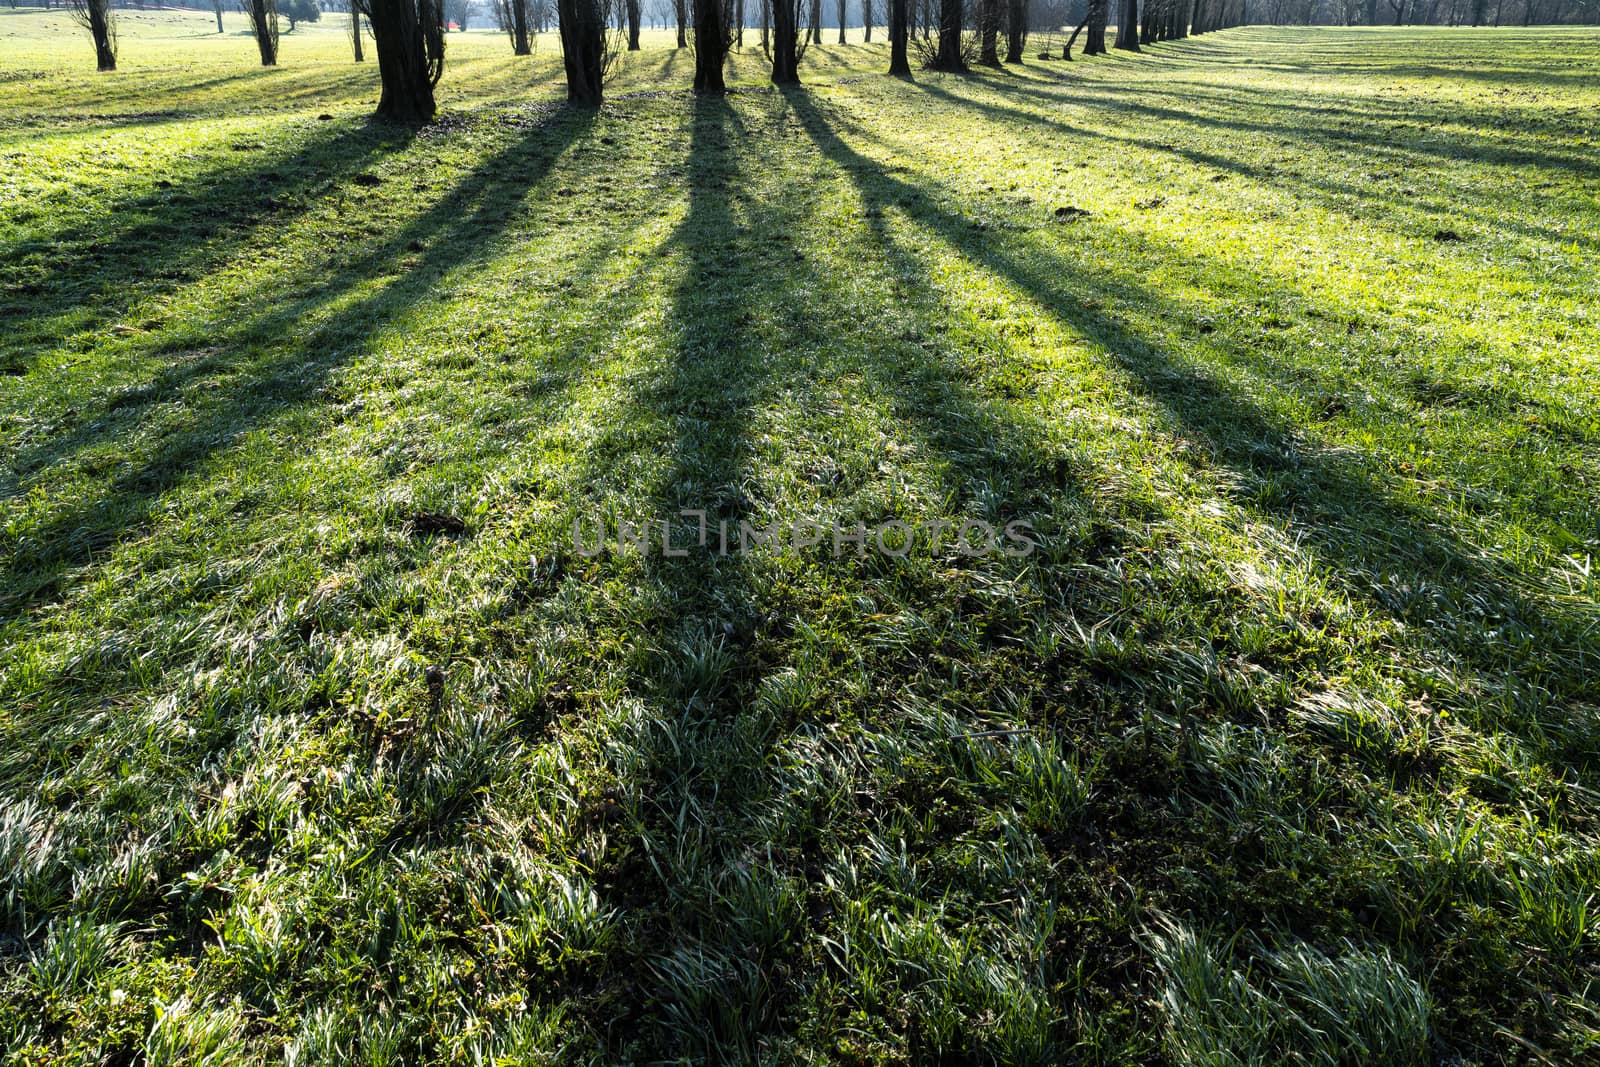 the shadows of the trees by sergiodv